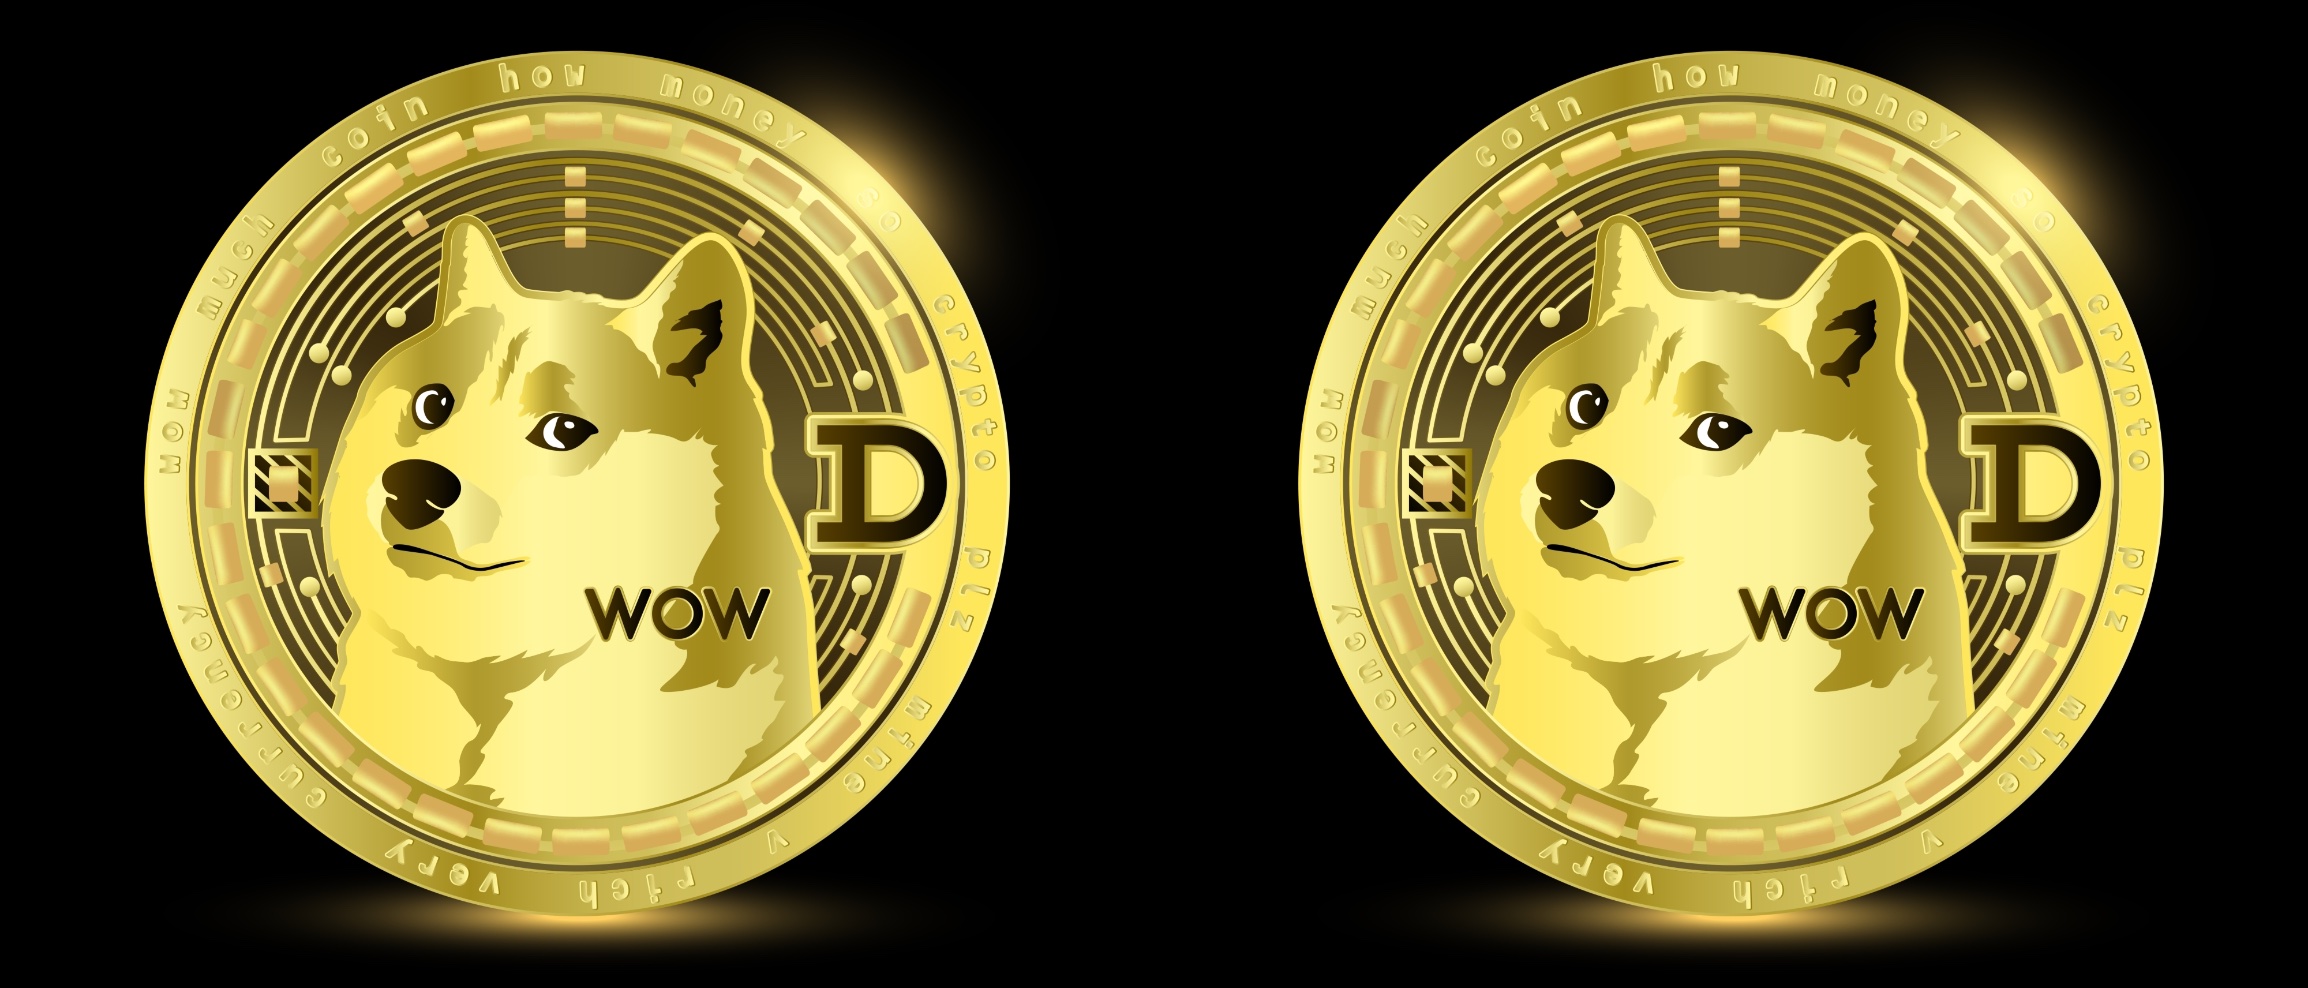 Tesla Ditches Bitcoin Reference in Payment Code, Spares Dogecoin